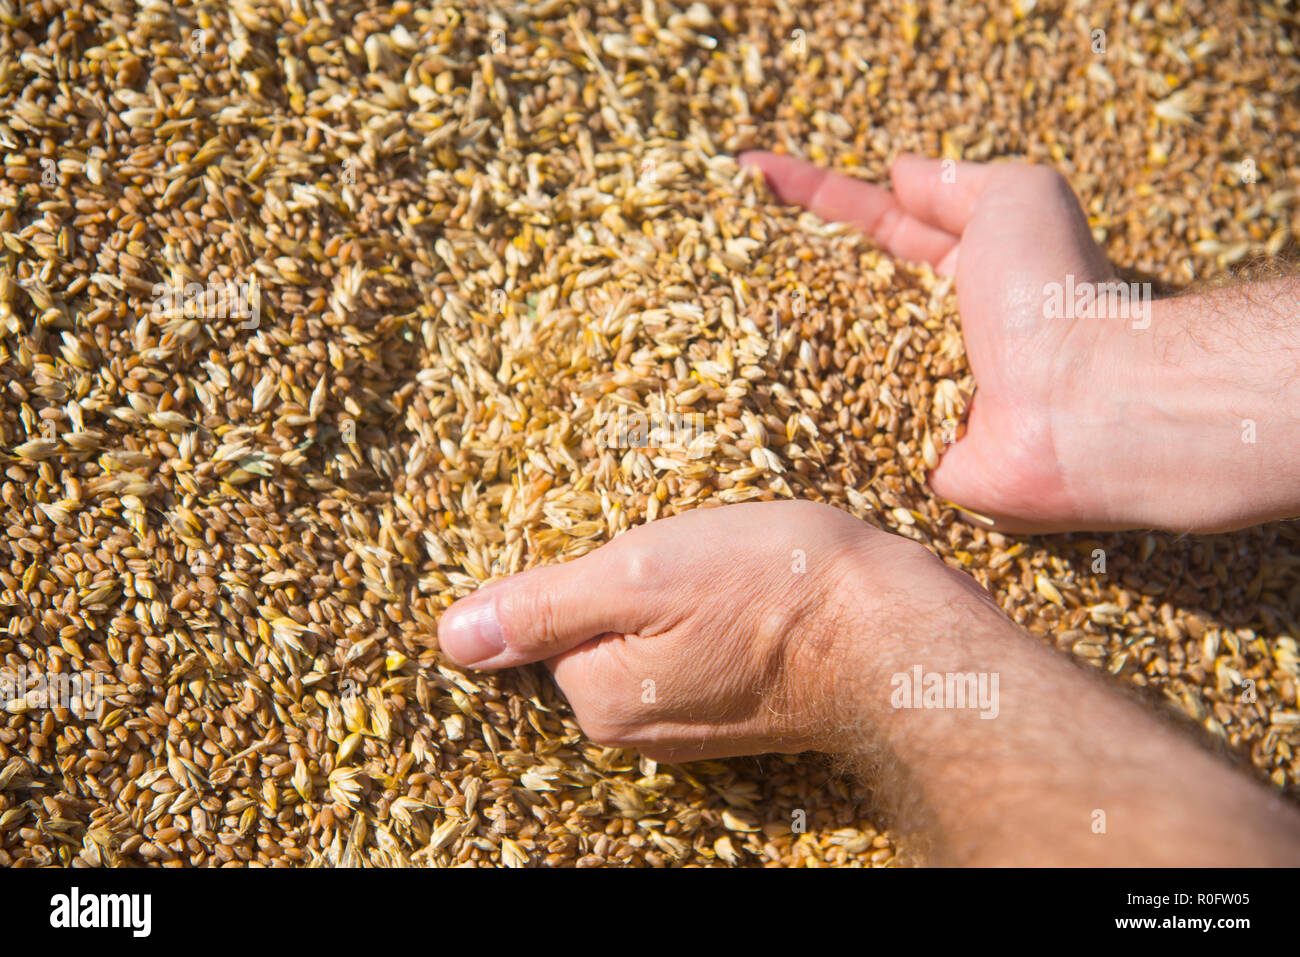 Hands taking a handful of wheat grains. Stock Photo